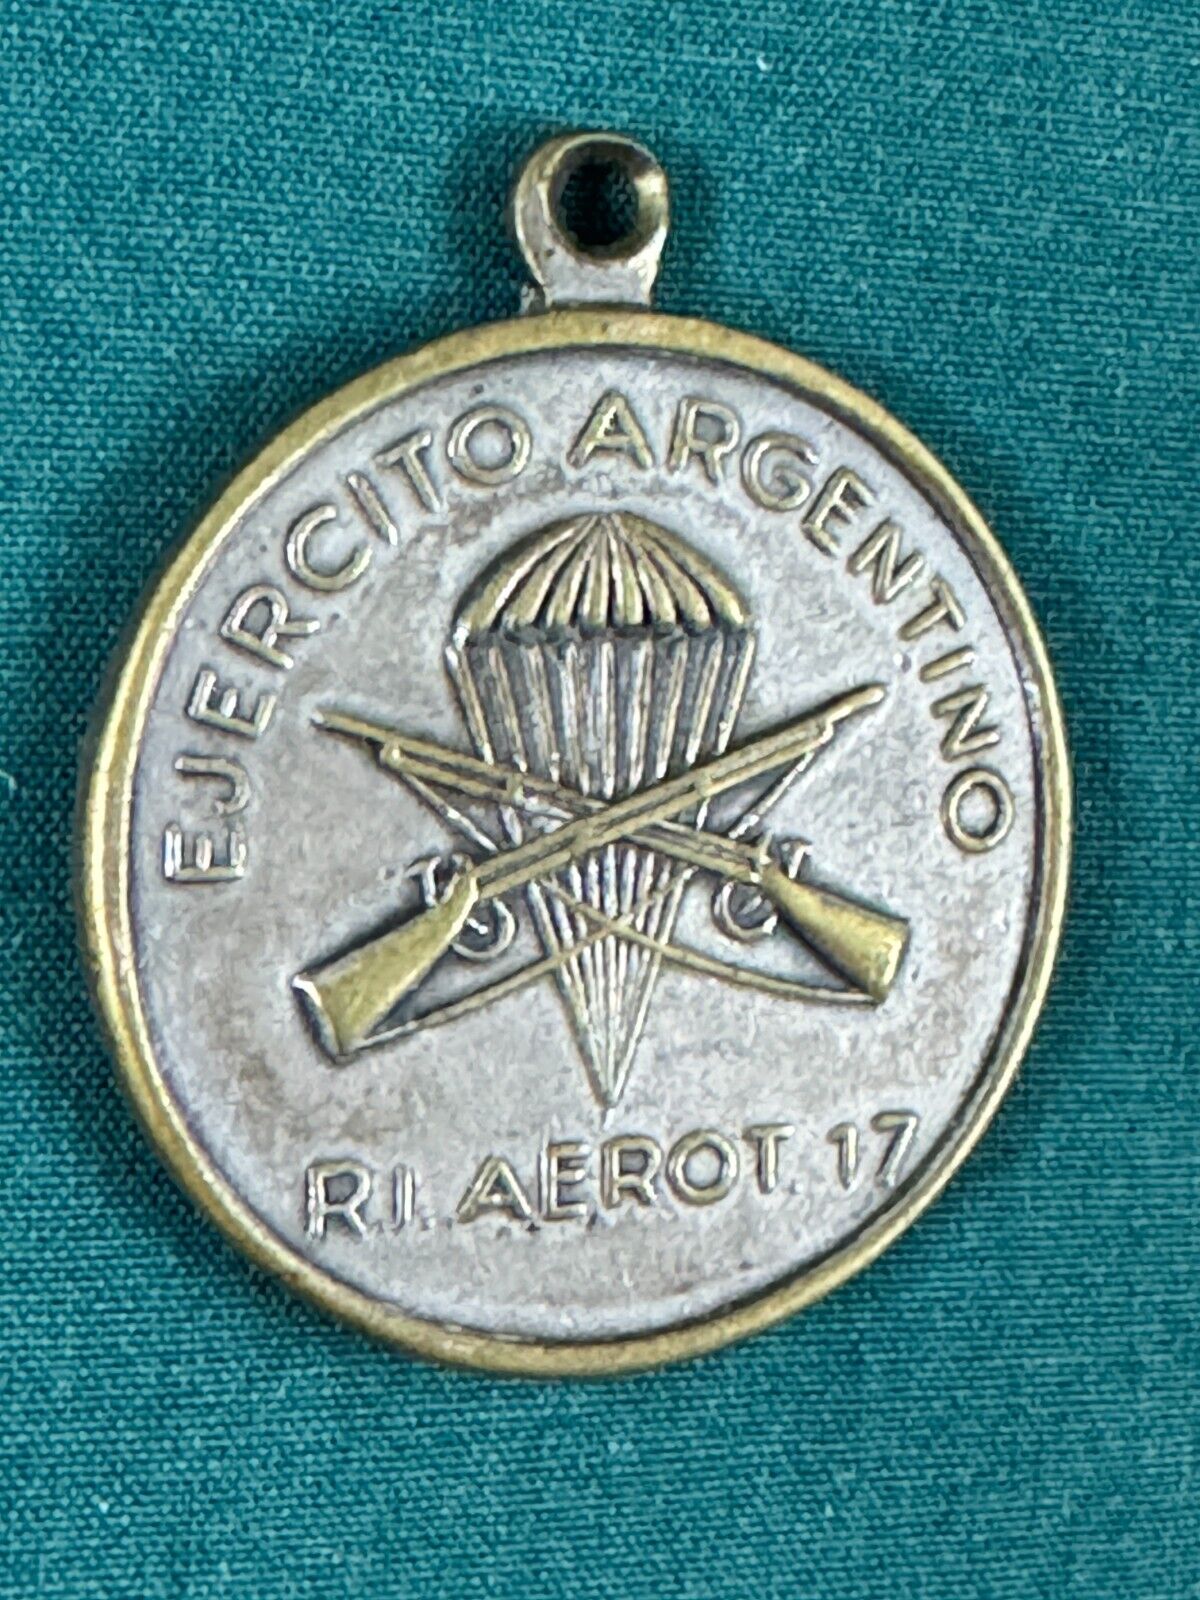 ARGENTINE MEDAL EJERCITO ARGENTINO ARMY CROSS RIFLES EMBLEM